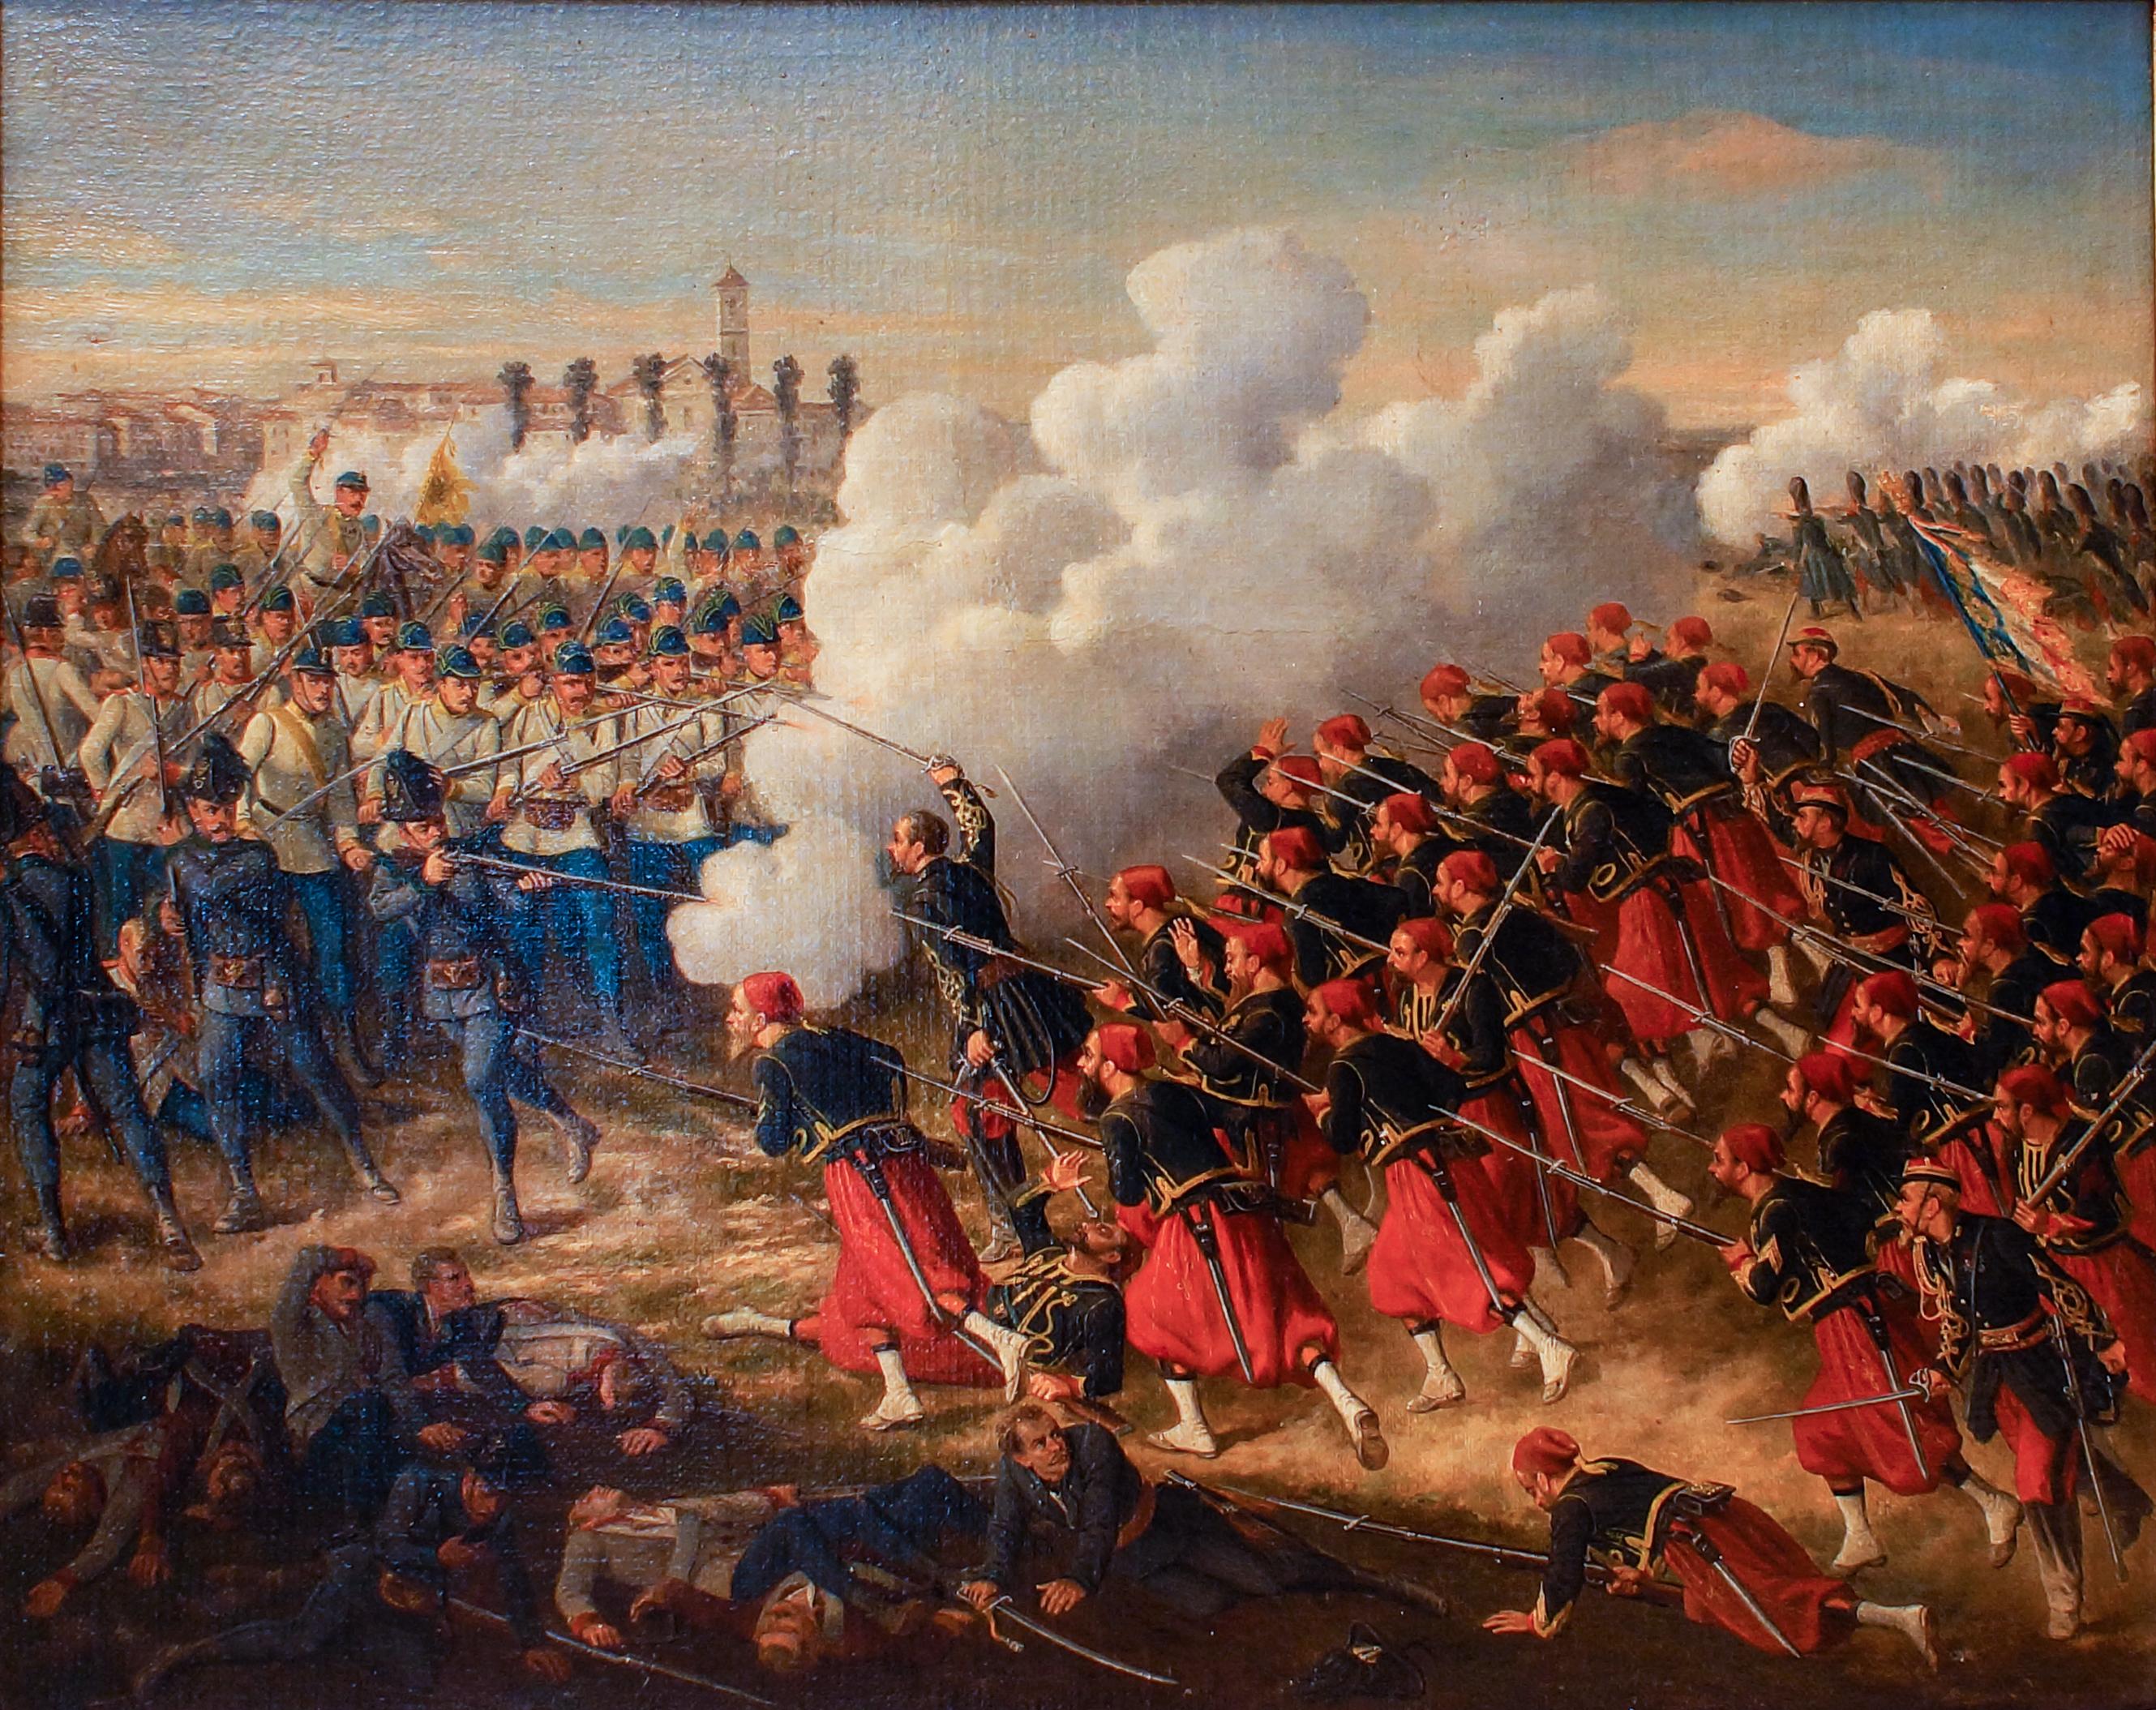 Unknown Figurative Painting - The Battle of Solferino - Oil on Canvas by Italian Master - 1860 ca.